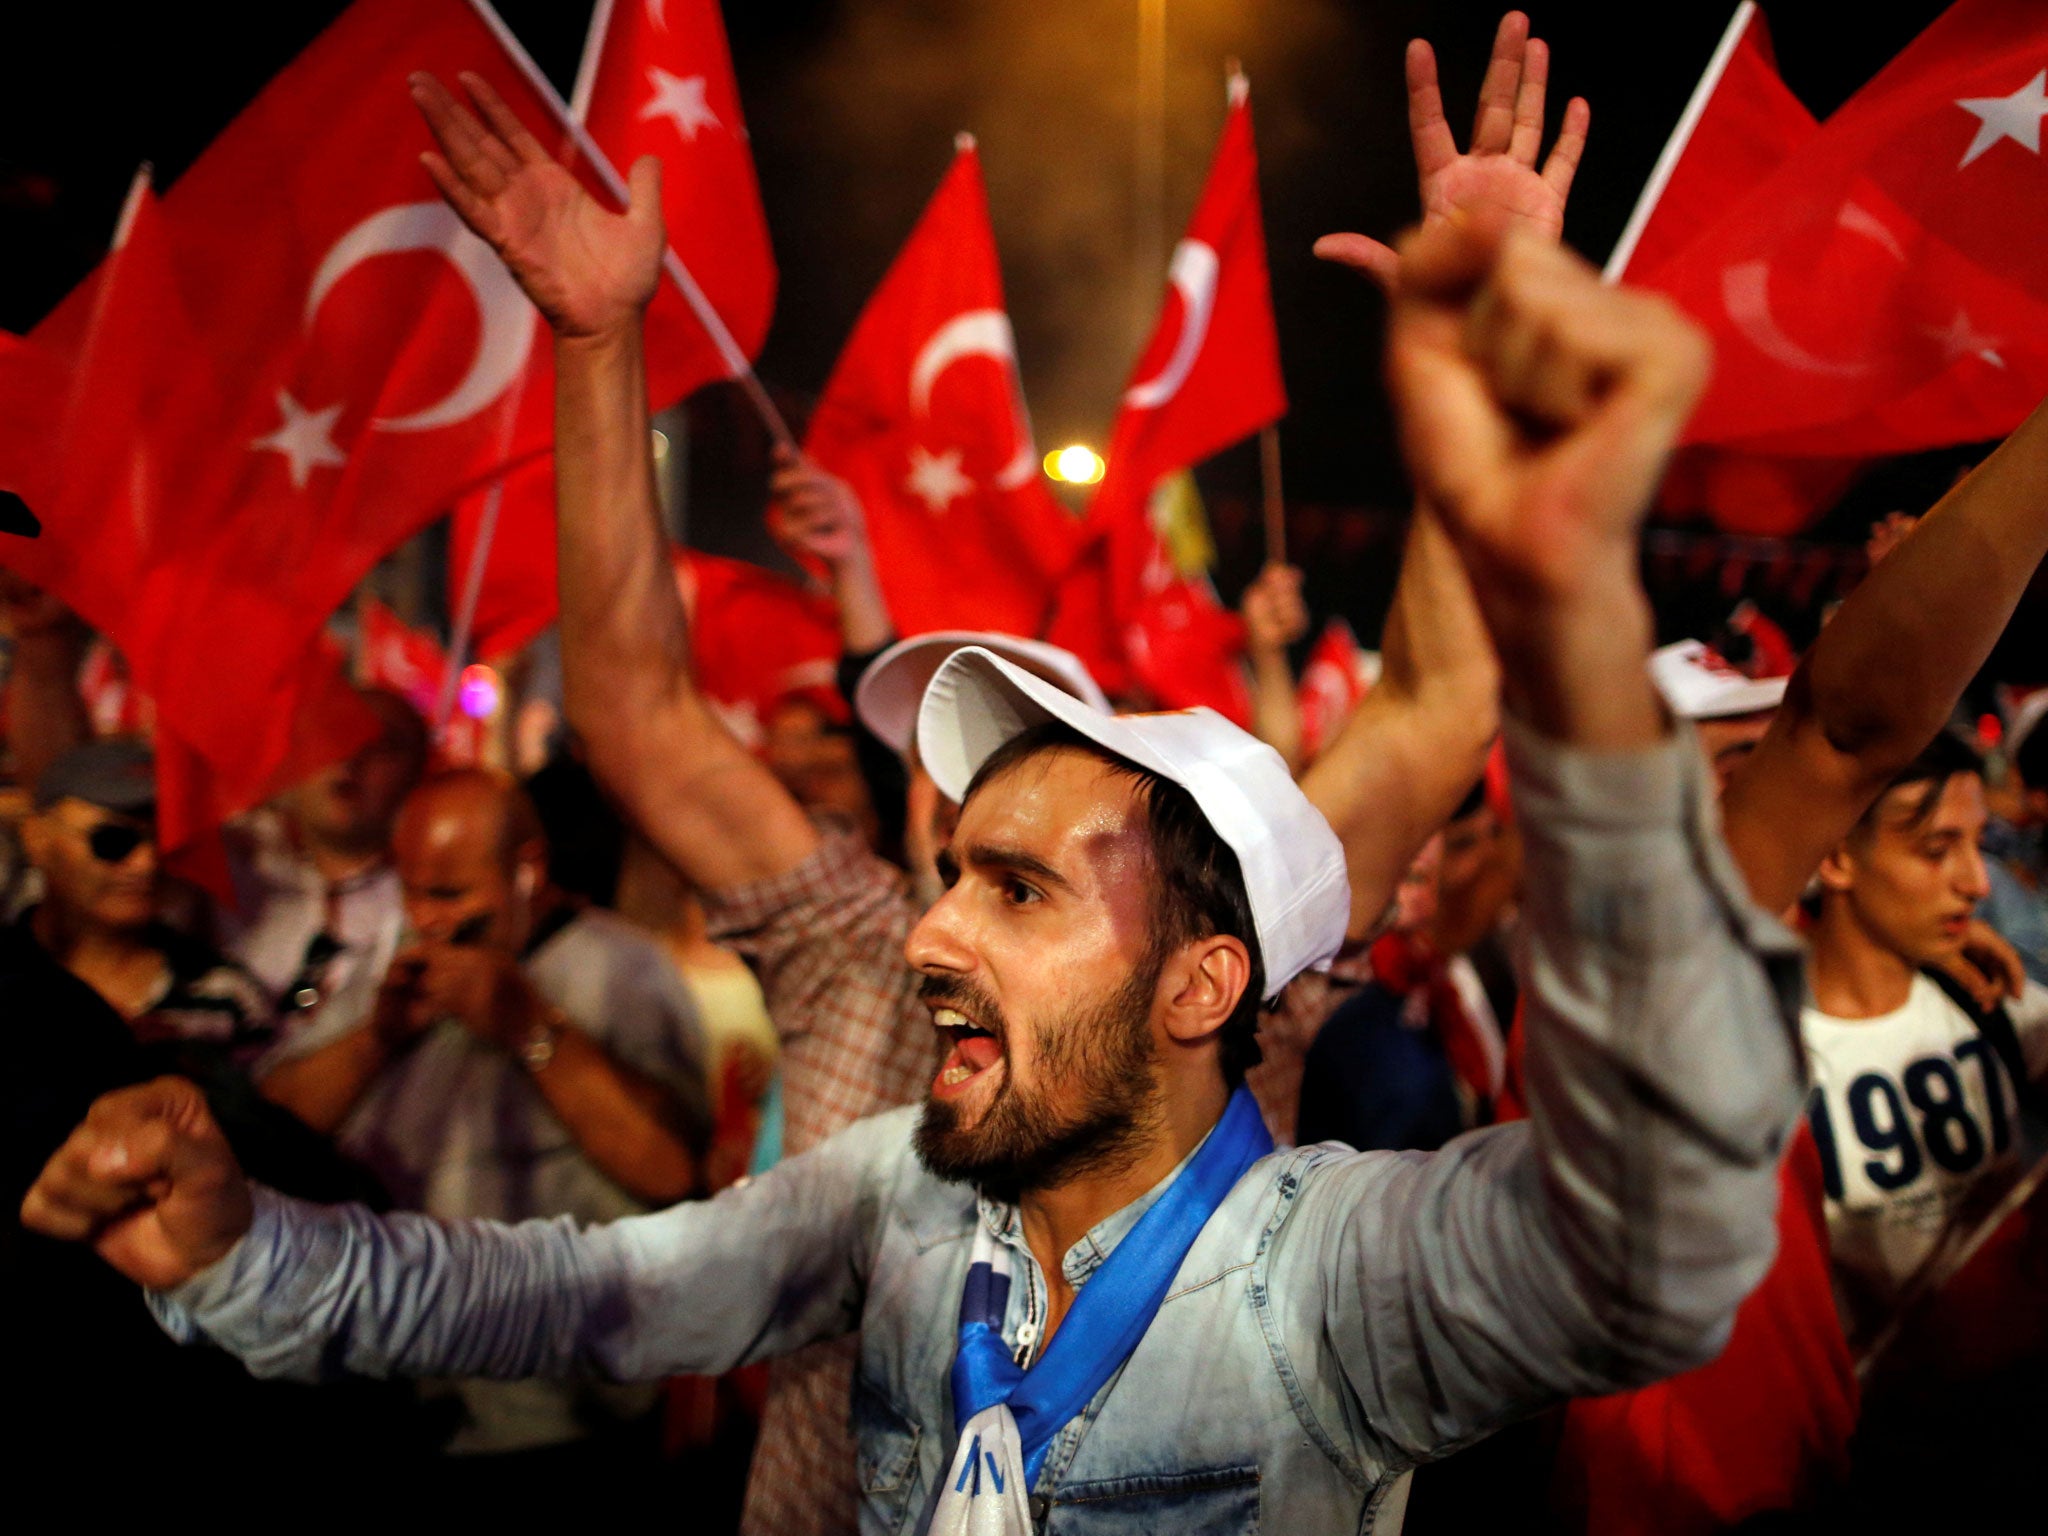 Supporters of President Erdogan in Istanbul's Taksim Square, where thousands of people have gathered in recent days